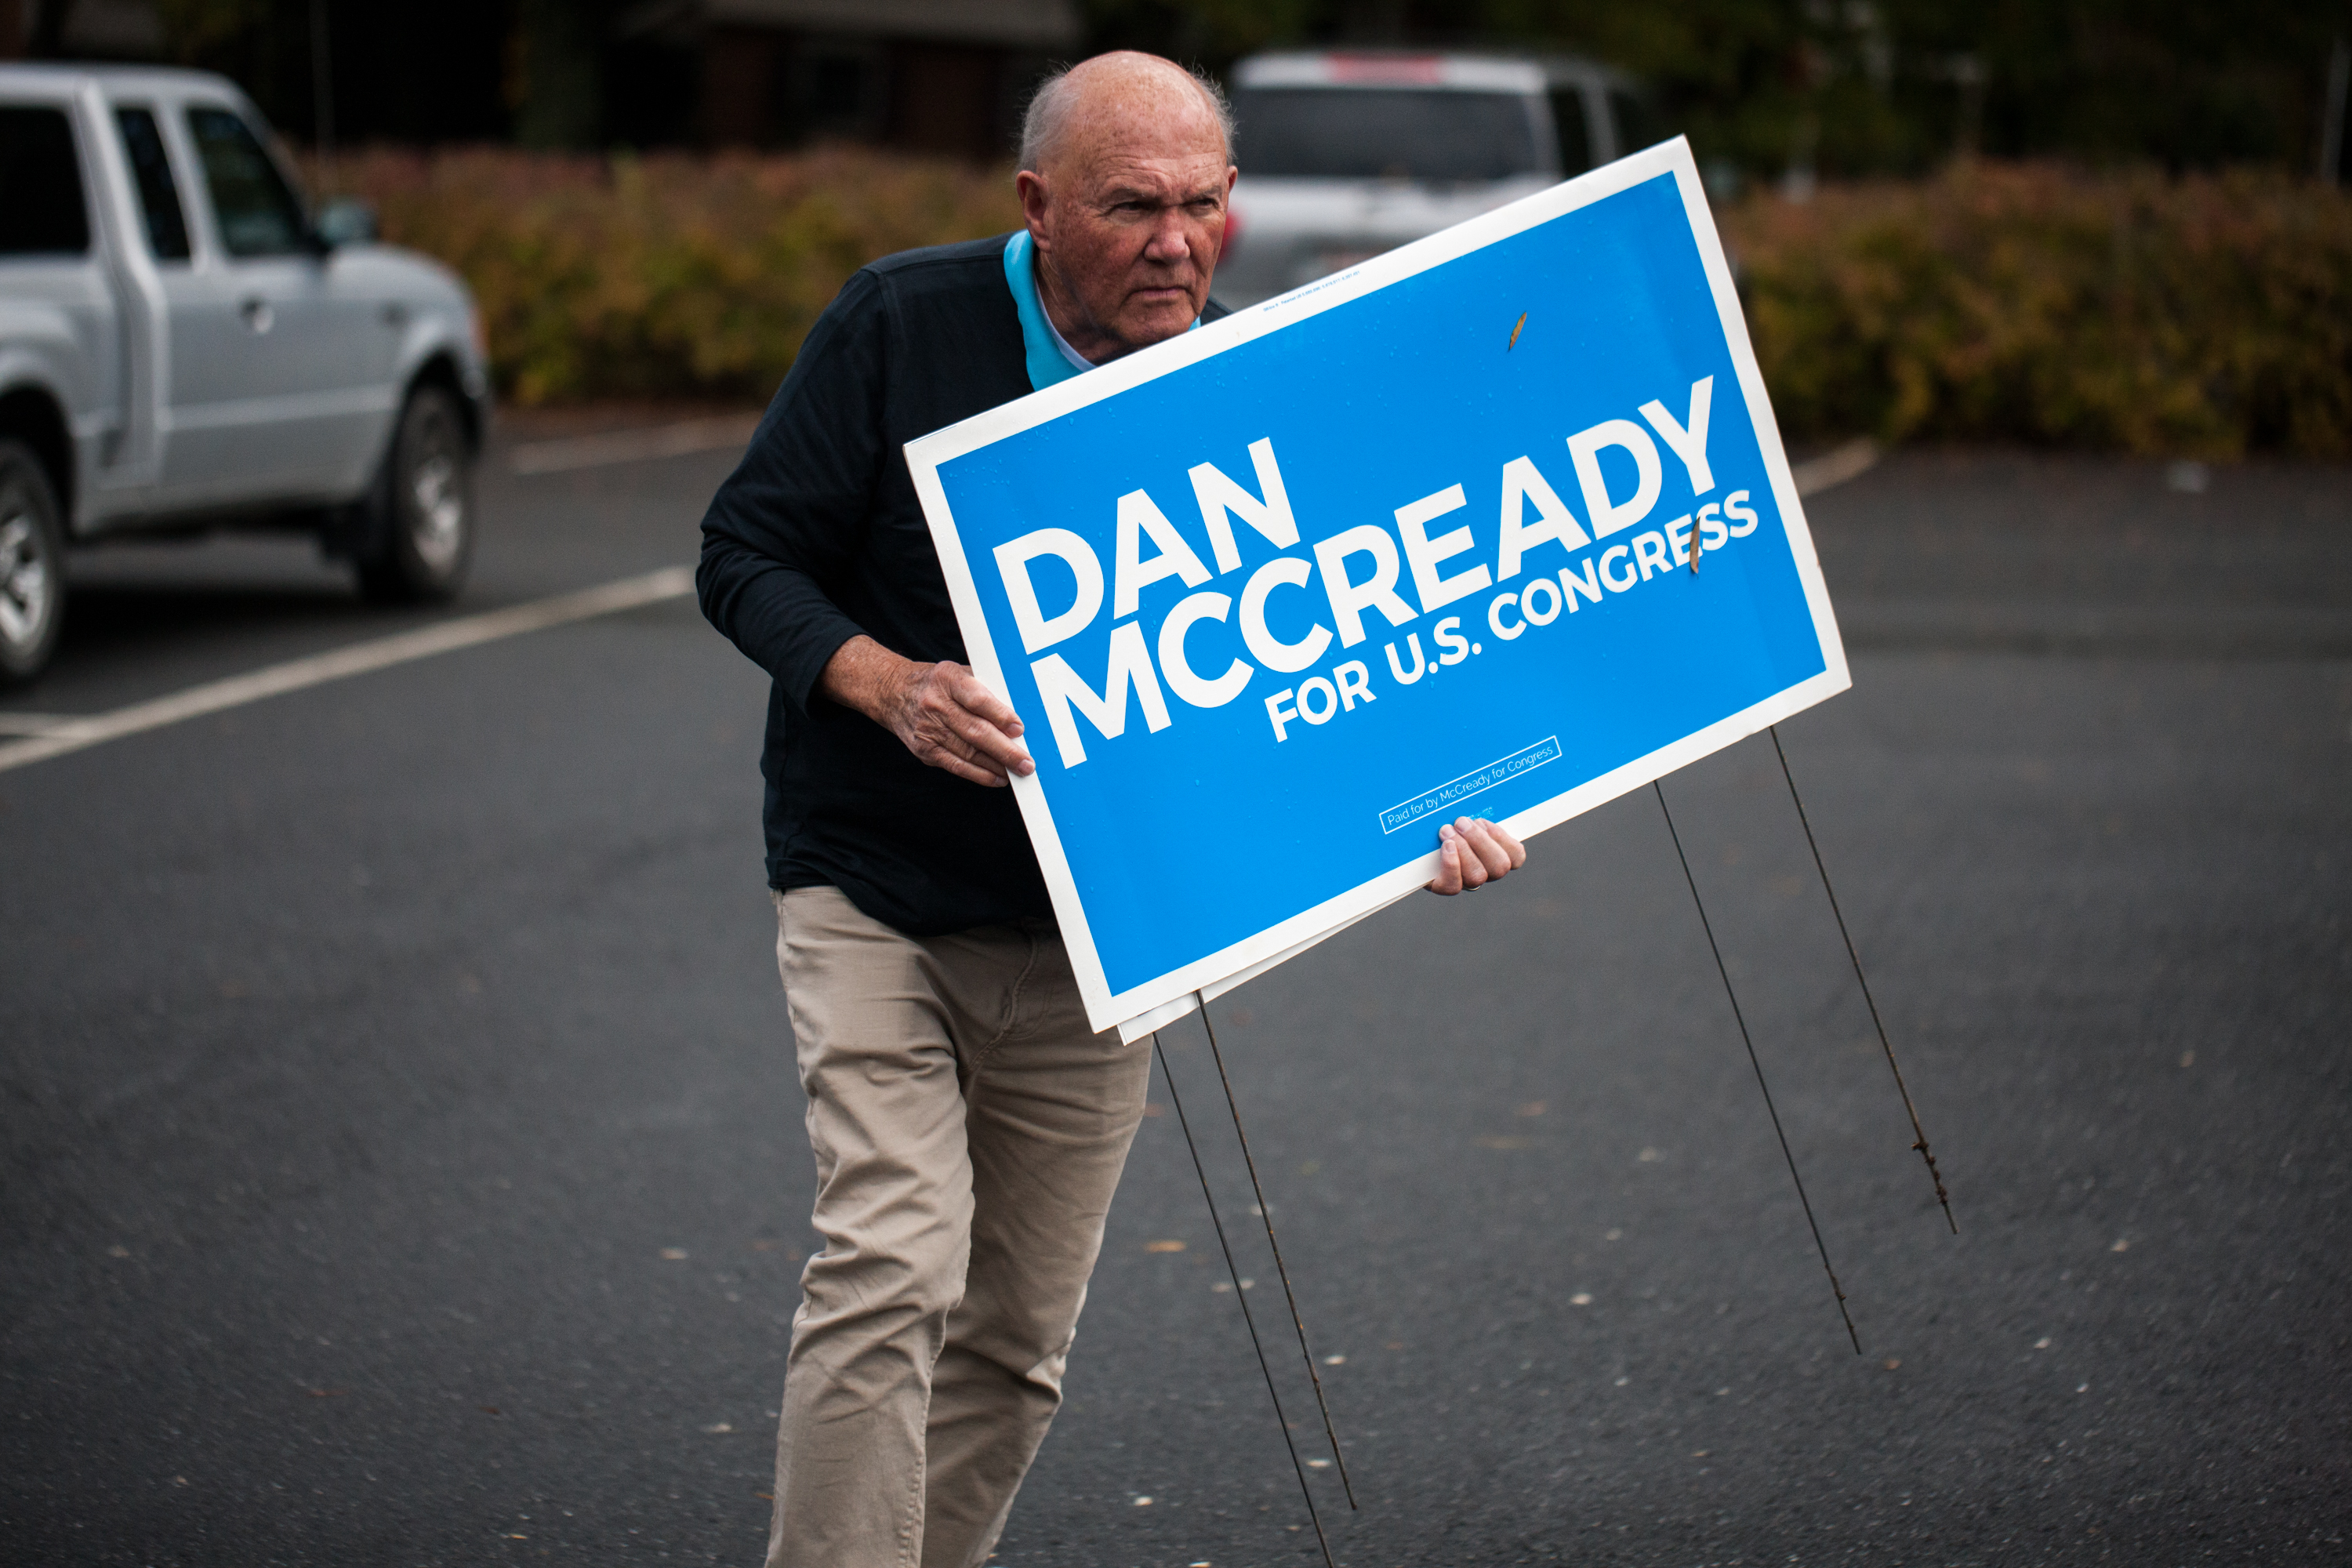 A campaign volunteer for Democratic US House candidate, Dan McCready, carries signs on November 6, 2018 in Charlotte, North Carolina. (LOGAN CYRUS/AFP/Getty Images)